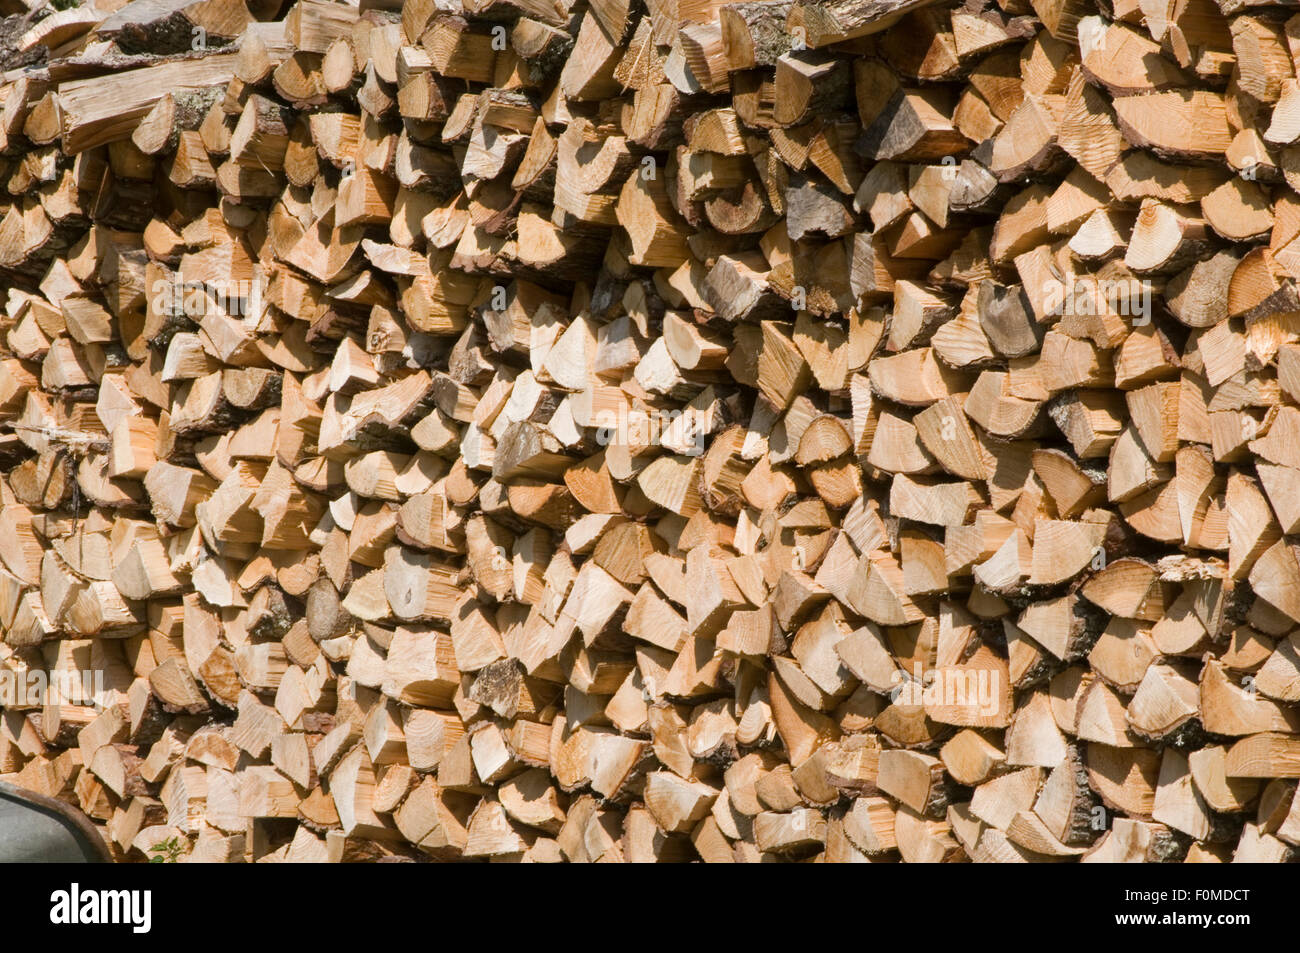 chopped fire wood firewood chopping cutting stacked stacking split branches dry drying seasoning for the winter store stored car Stock Photo